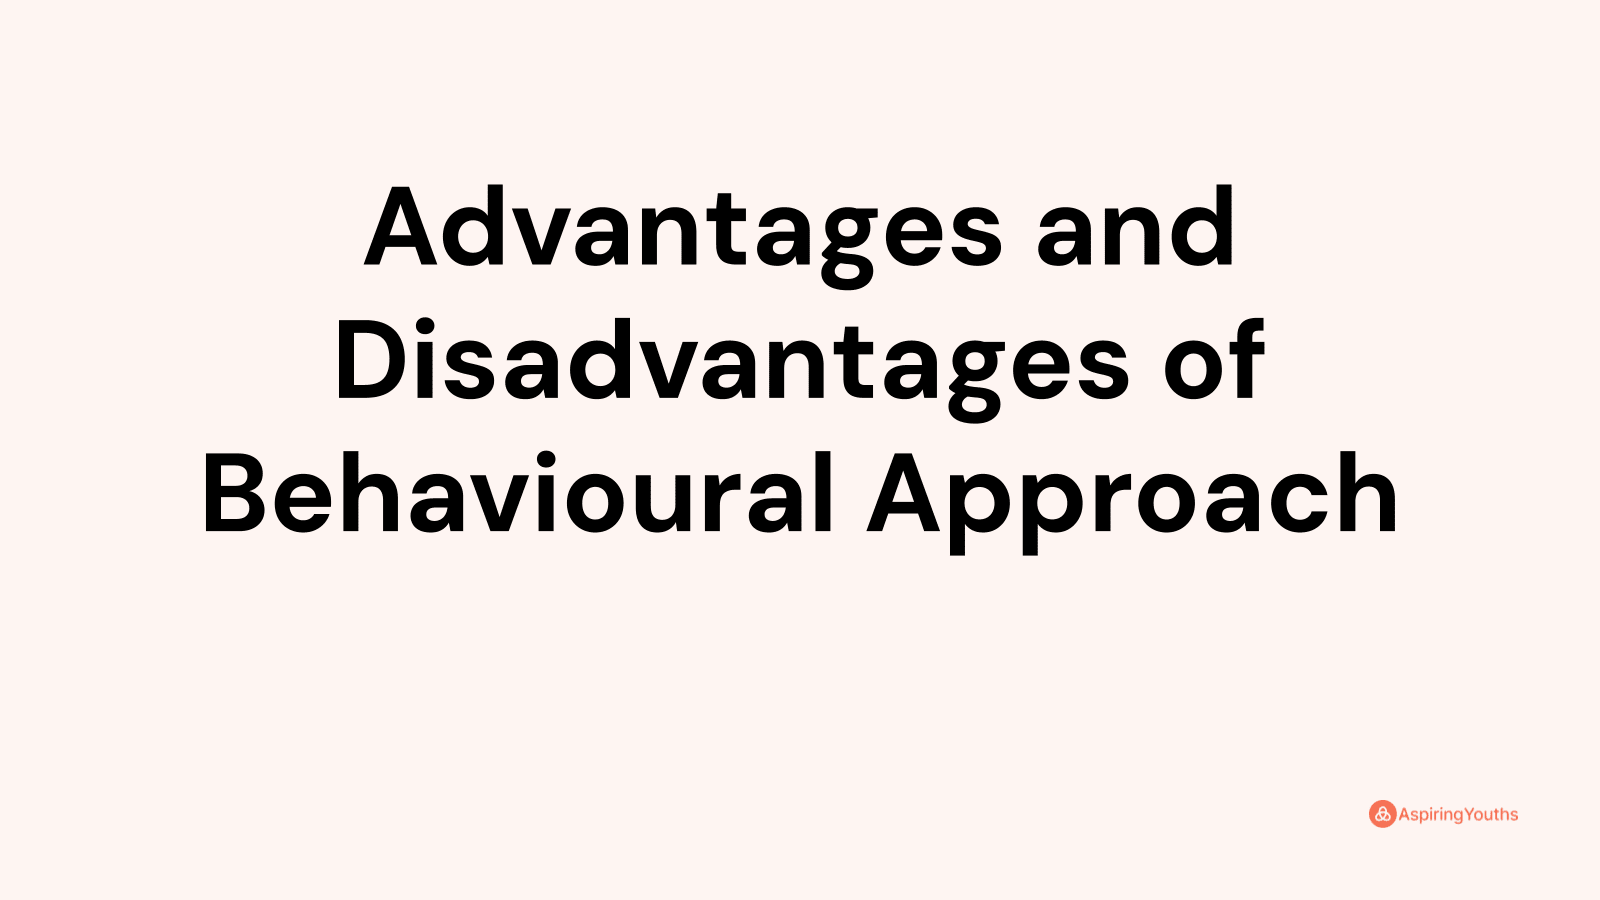 Advantages and disadvantages of Behavioural Approach